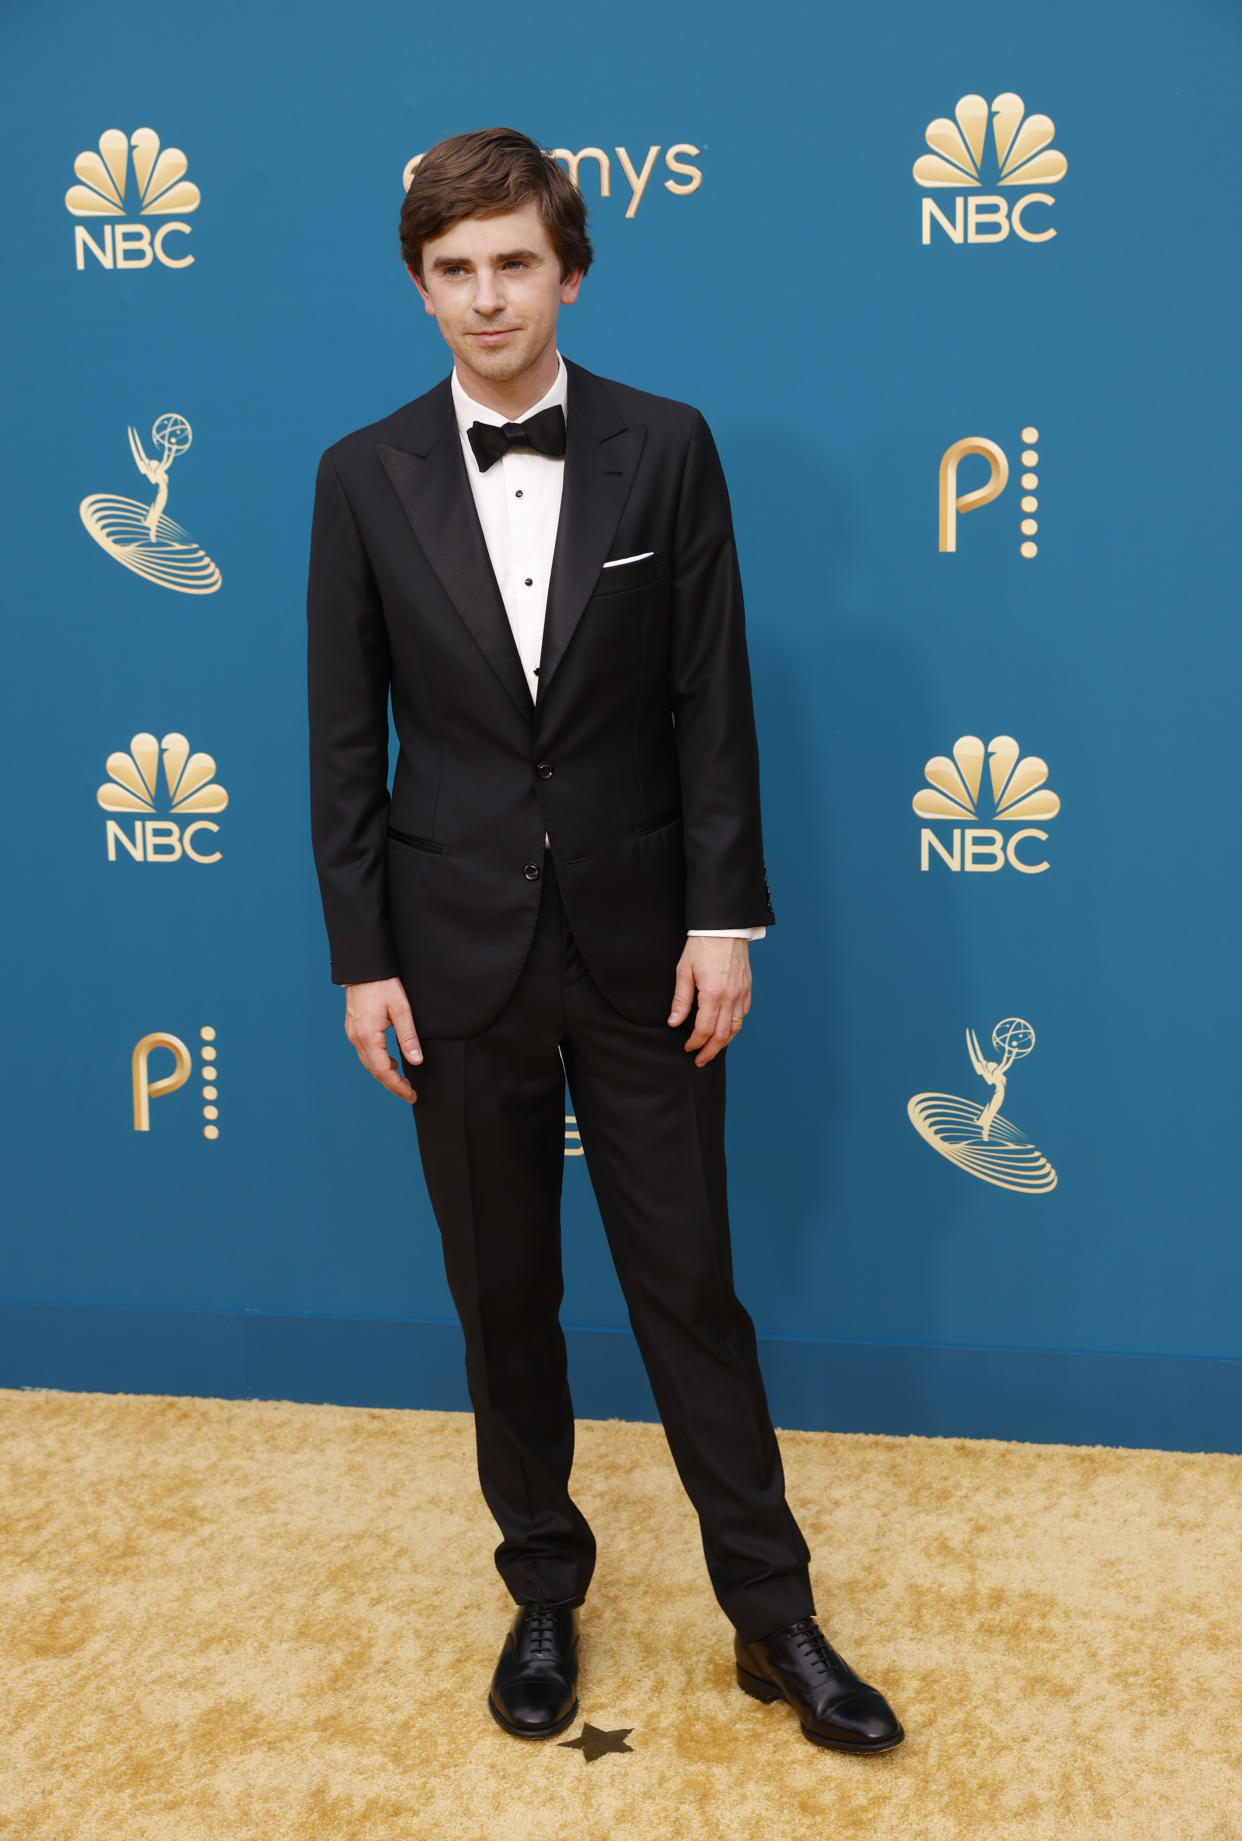 LOS ANGELES, CALIFORNIA - SEPTEMBER 12: 74th ANNUAL PRIMETIME EMMY AWARDS -- Pictured: (l-r) Freddie Highmore arrives to the 74th Annual Primetime Emmy Awards held at the Microsoft Theater on September 12, 2022. -- (Photo by Trae Patton/NBC via Getty Images)